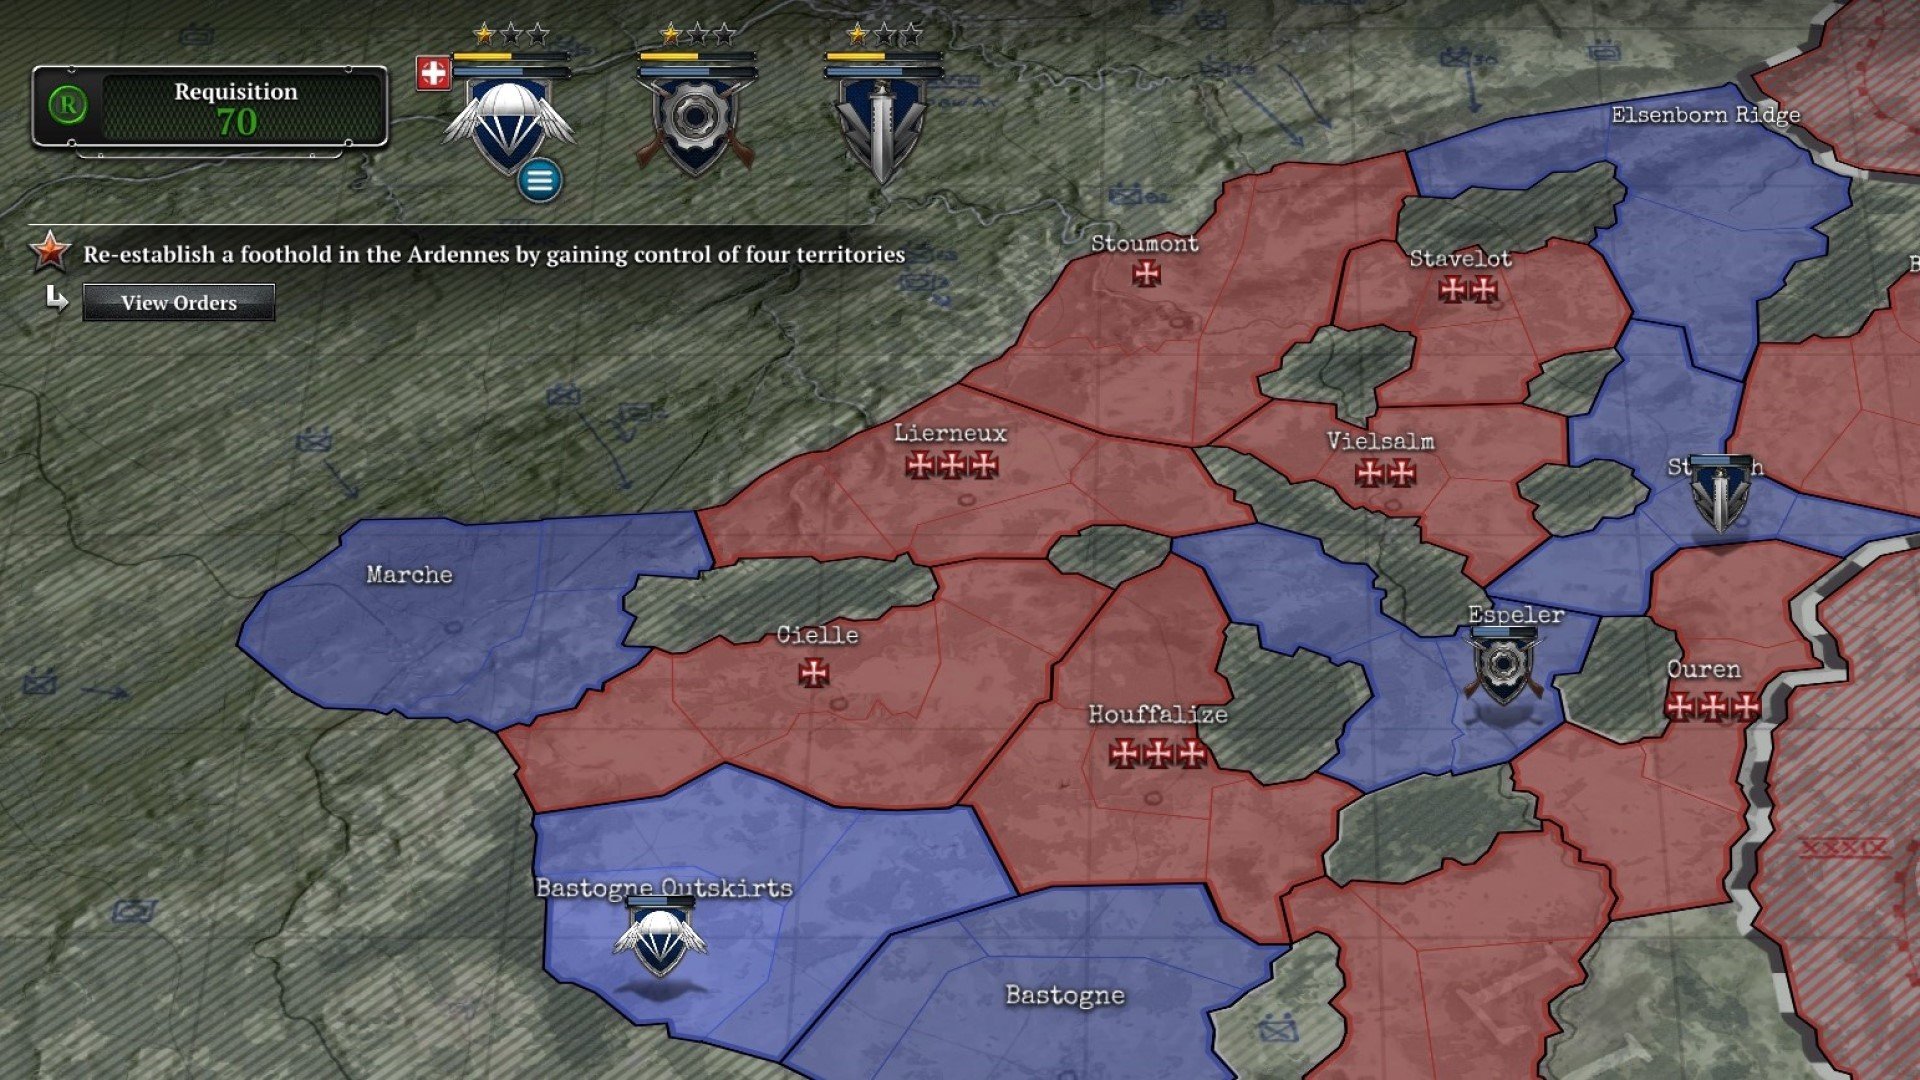 Best WW2 games - screenshot from Company of Heroes 2: Ardennes Assault showing red and blue map regions under Allied and Axis control